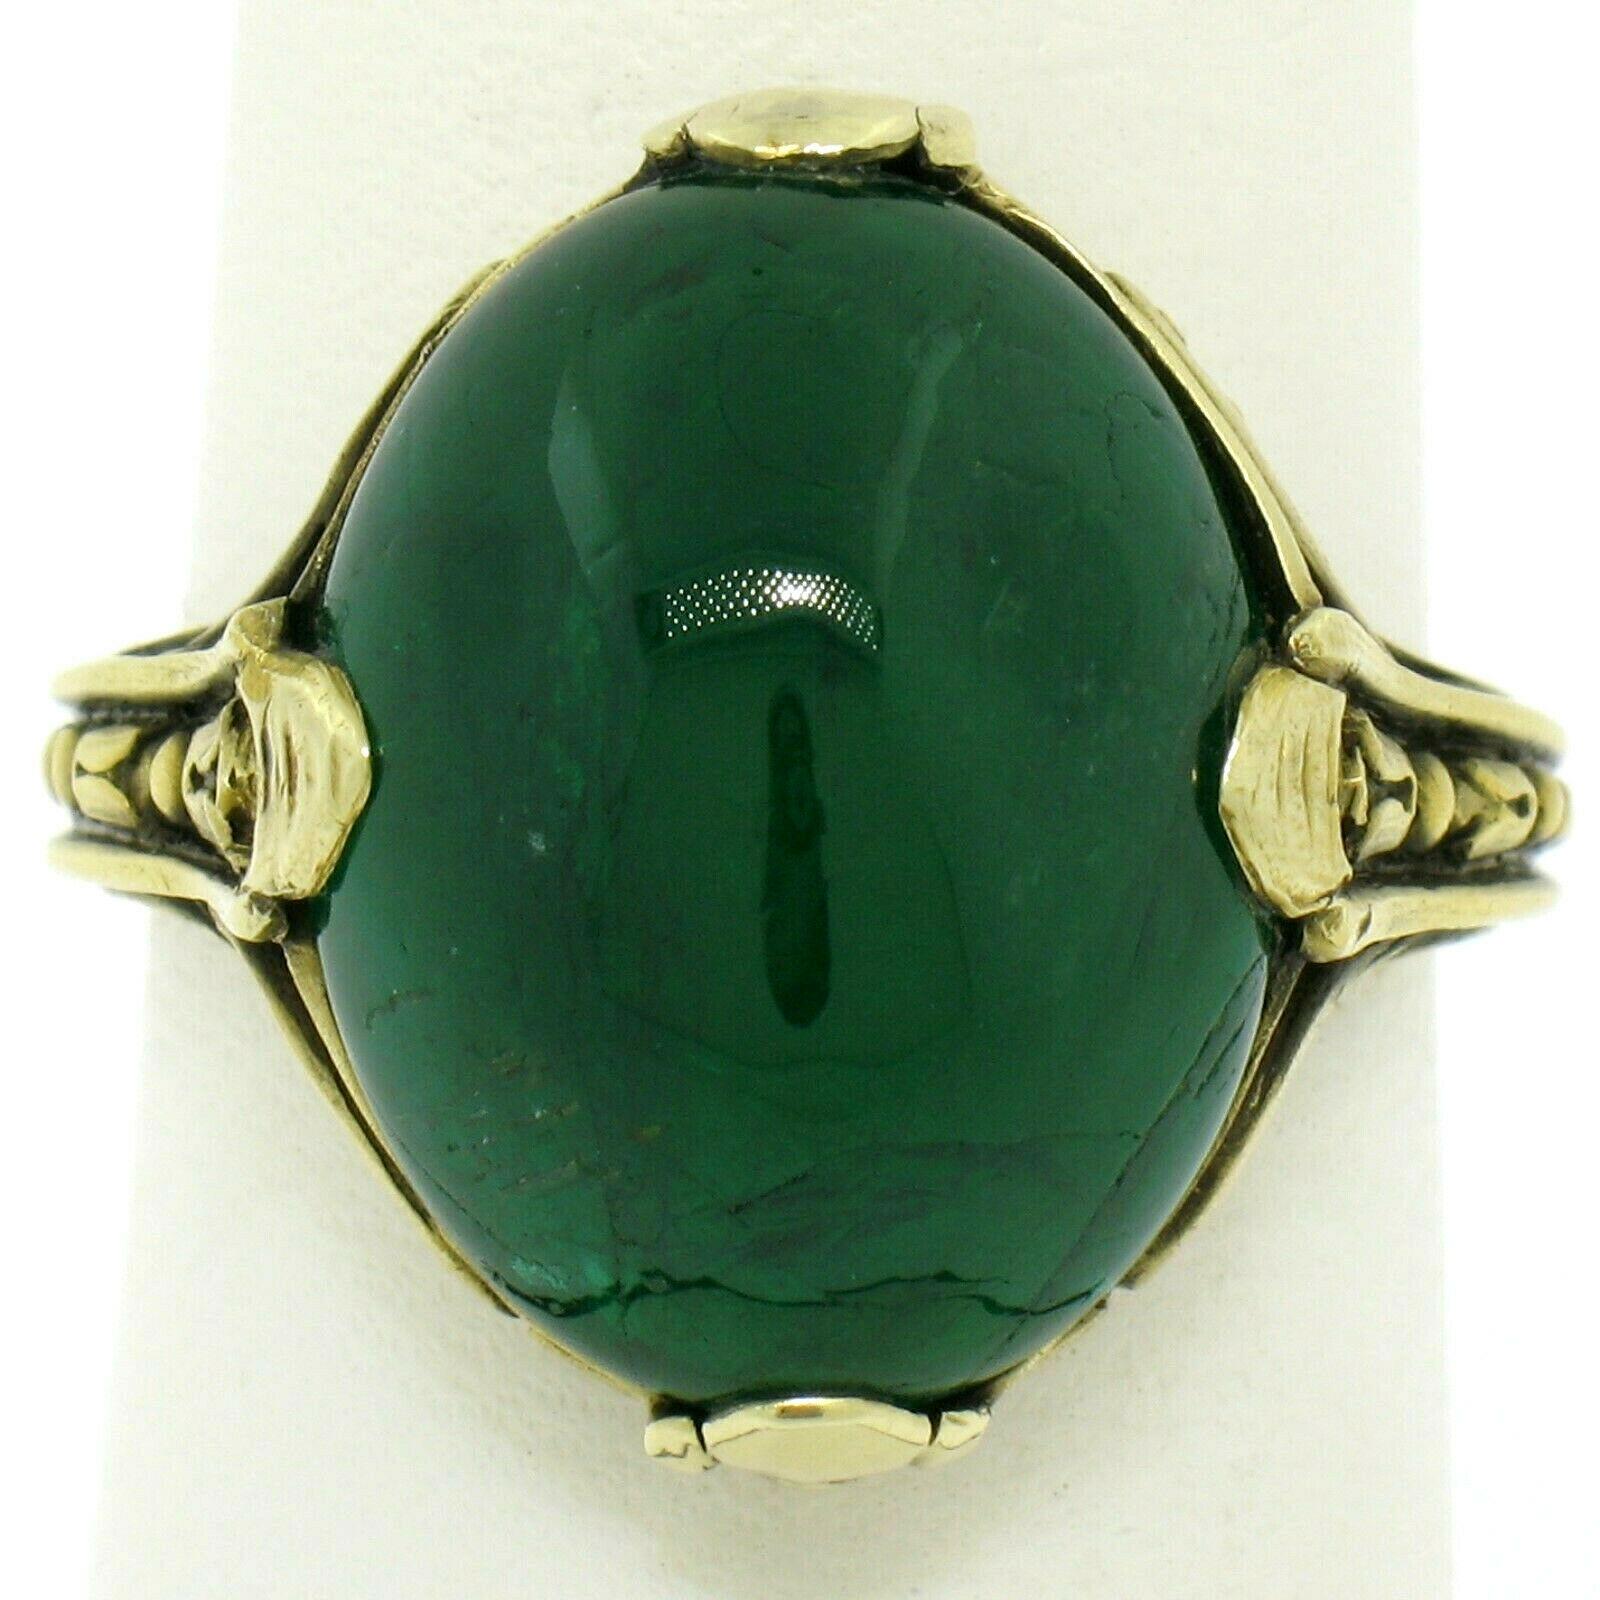 Women's Antique 14k Gold 10.03ct GIA Oval Cabochon Very Fine Green Zambian Emerald Ring